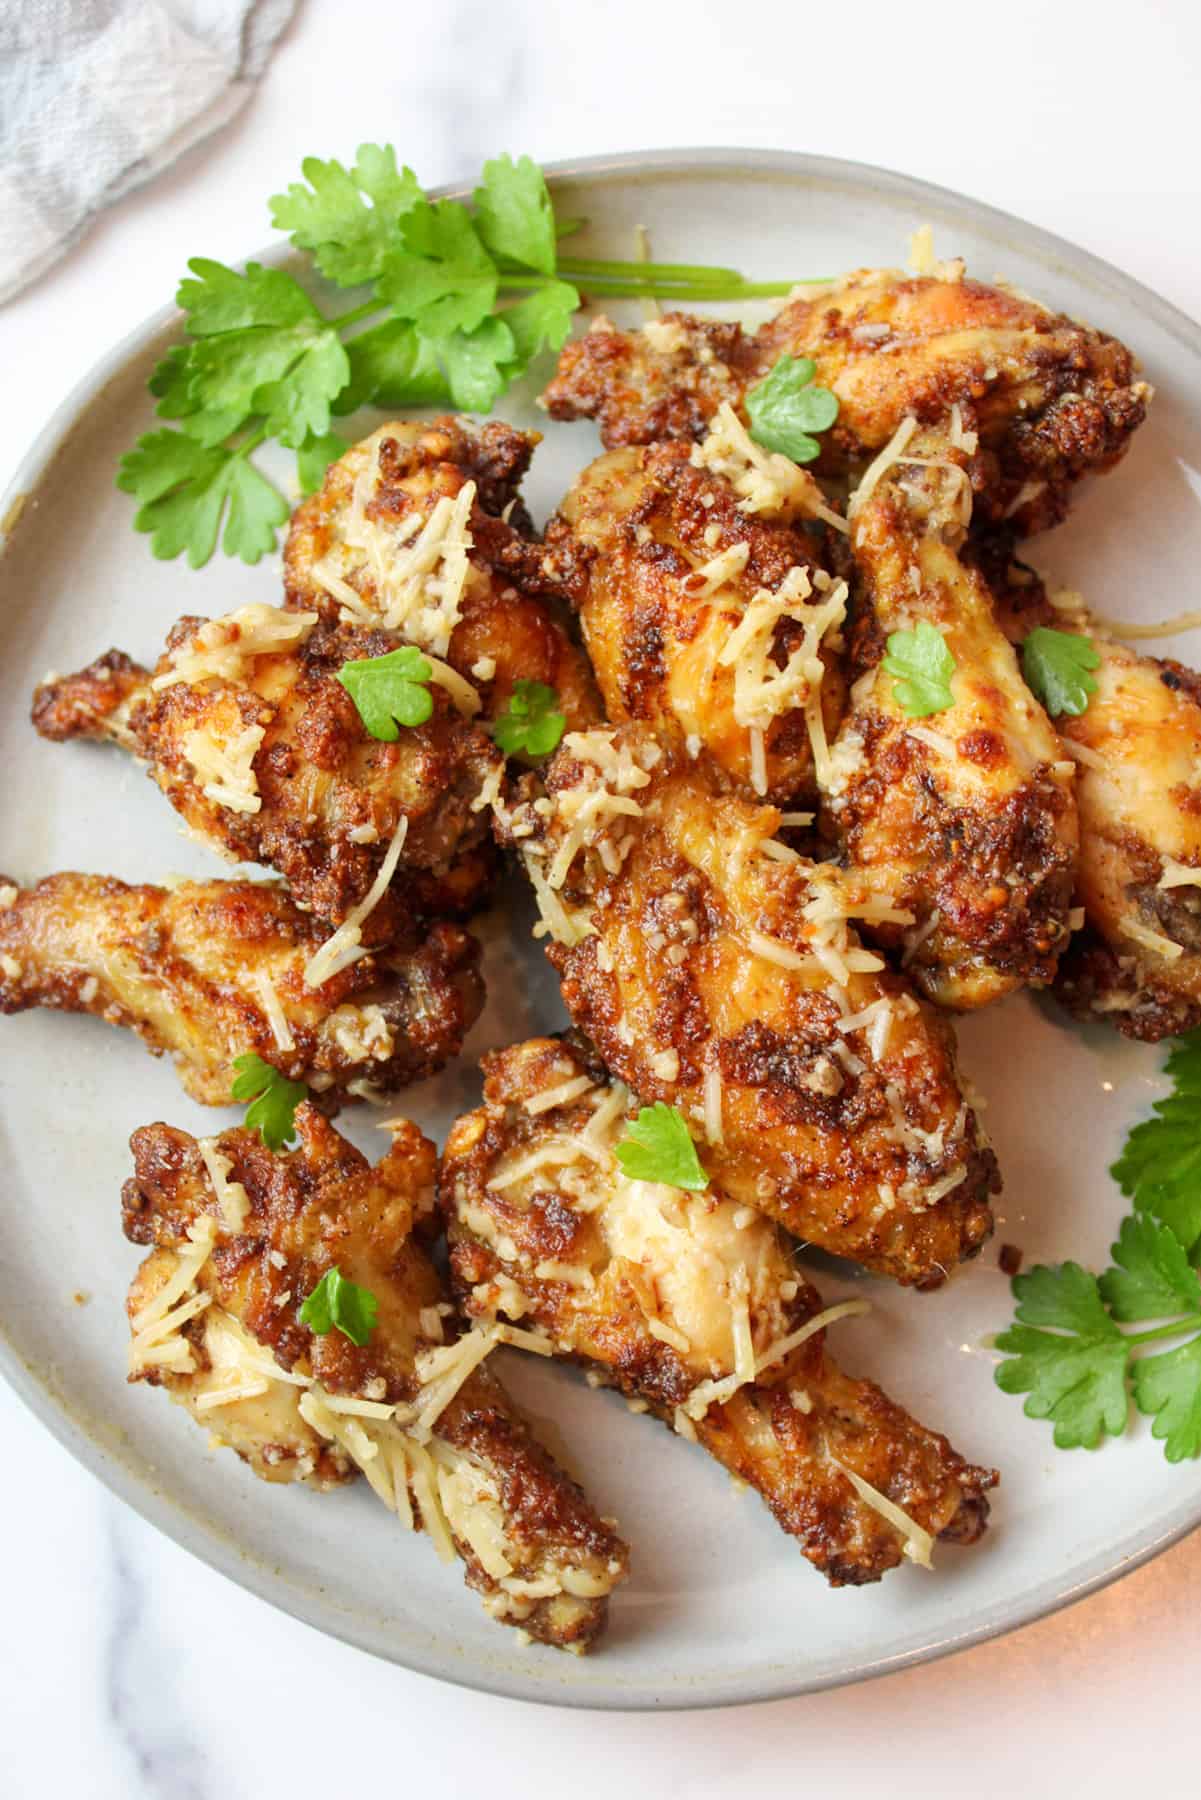 garlic parmesan chicken wings on a plate with green herb garnish.